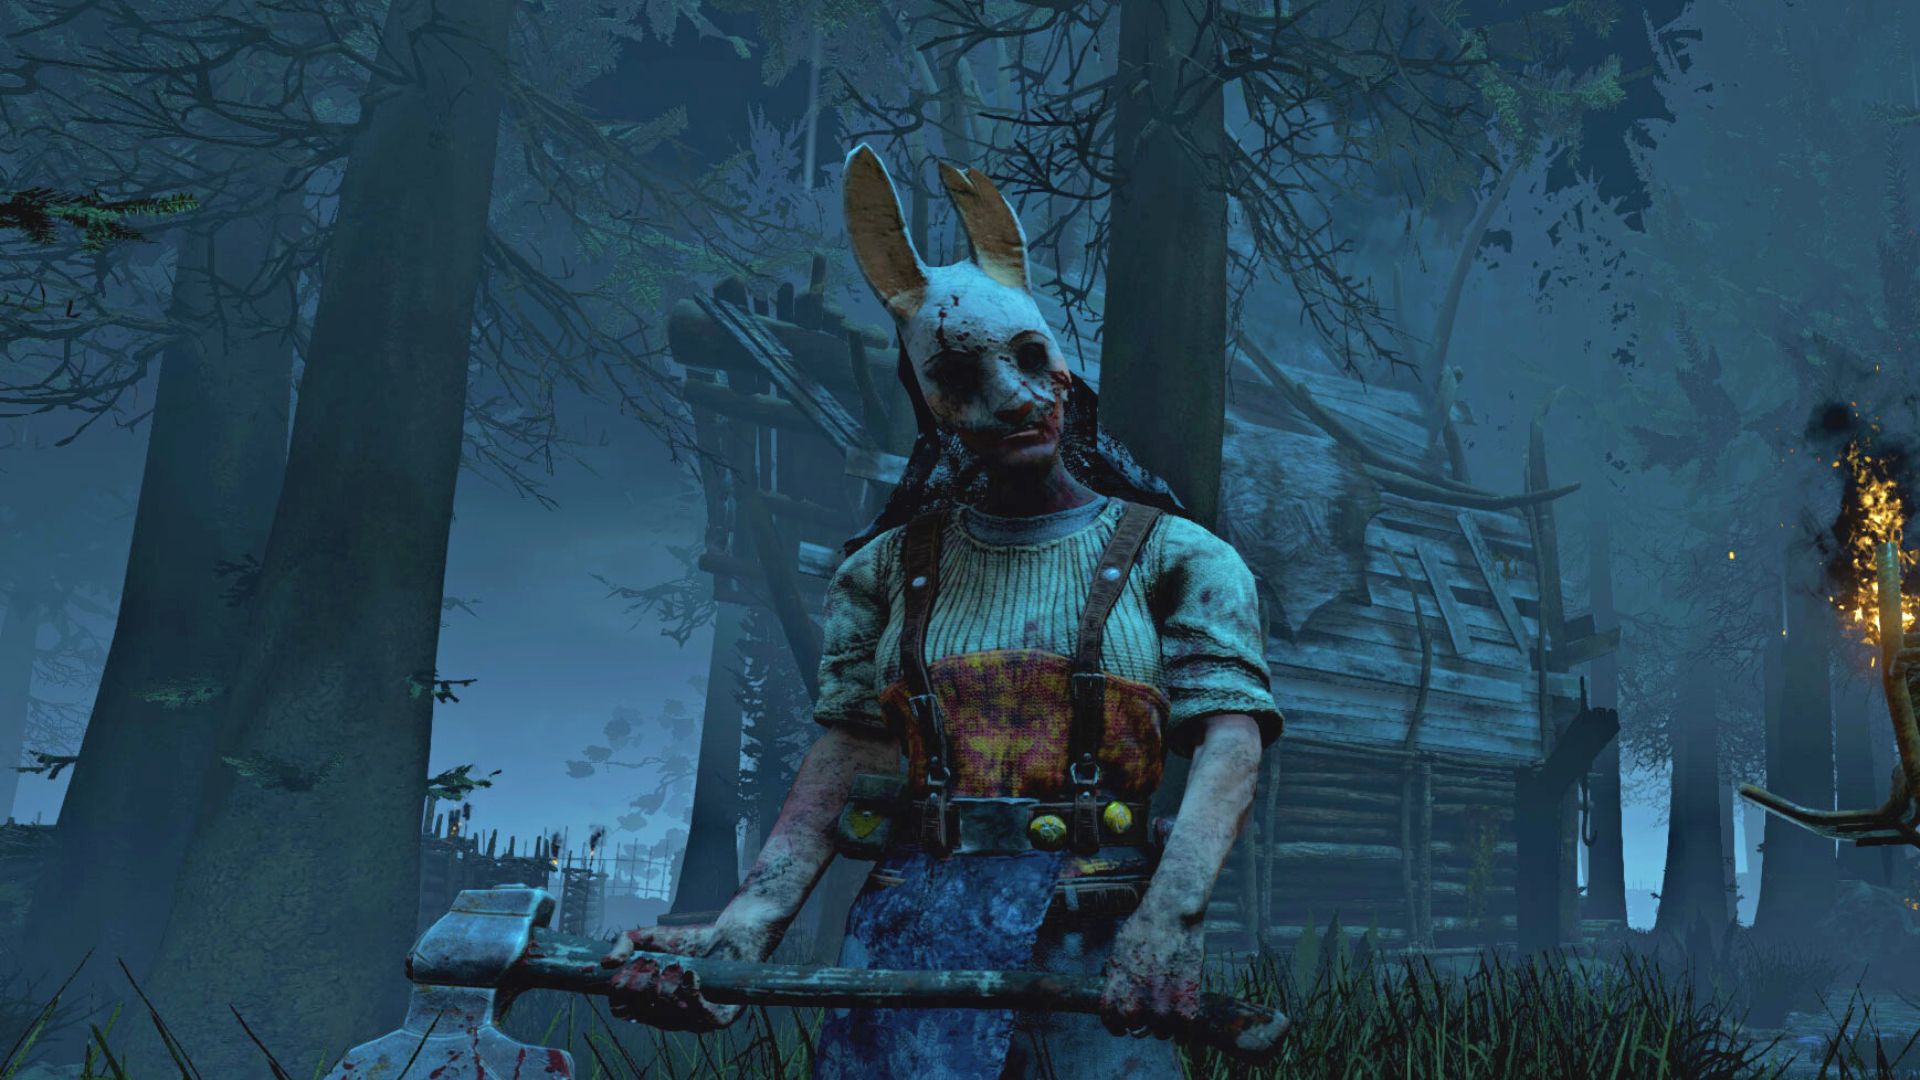 Dead by Daylight  A Multiplayer Action Survival Horror game